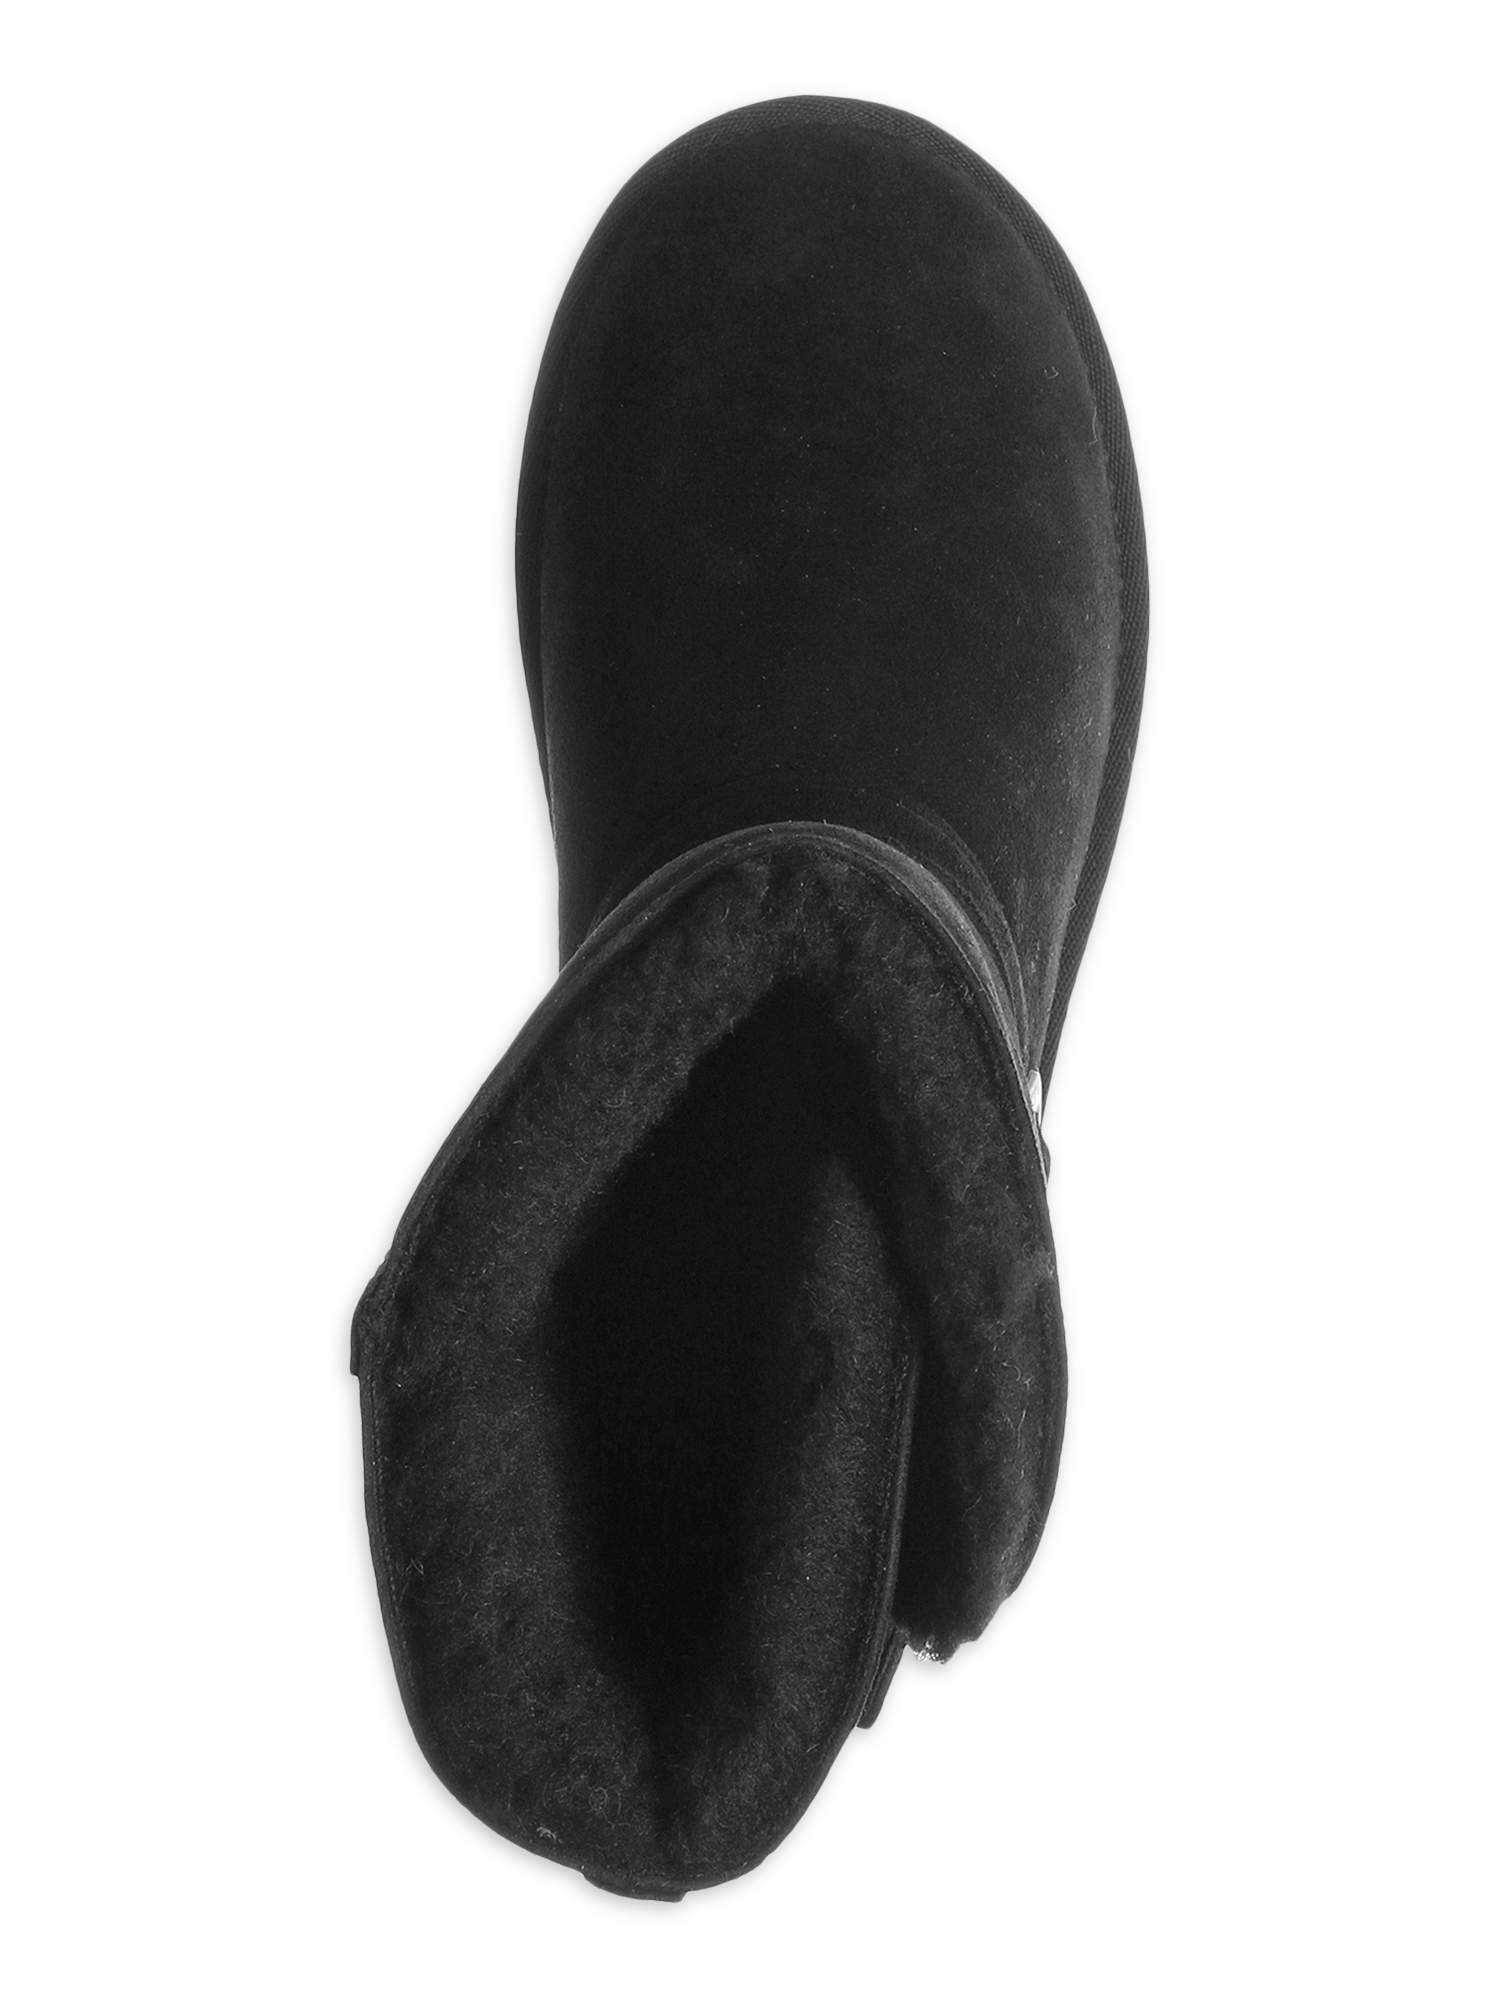 Pawz by Bearpaw Womens Camille Faux Fur Lined Suede Boot - image 3 of 5